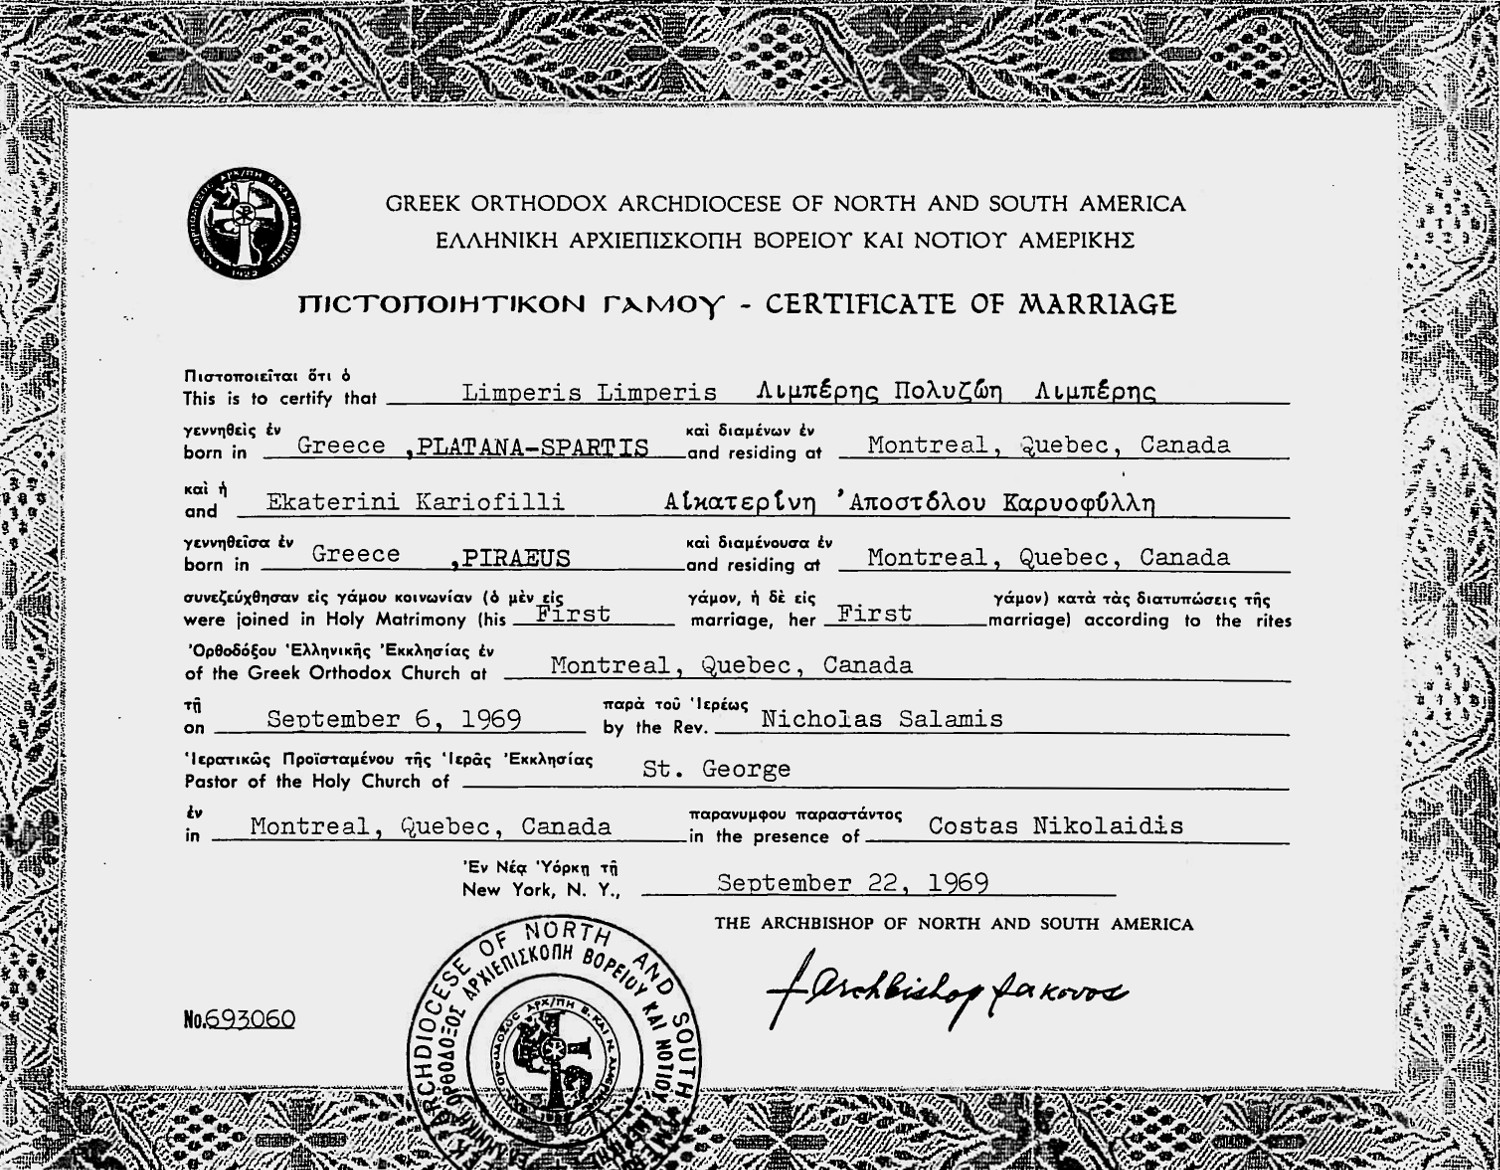 “Enter into matrimony”  Marriage certificate from the Catherine Limperis archive. Source: Immigrec